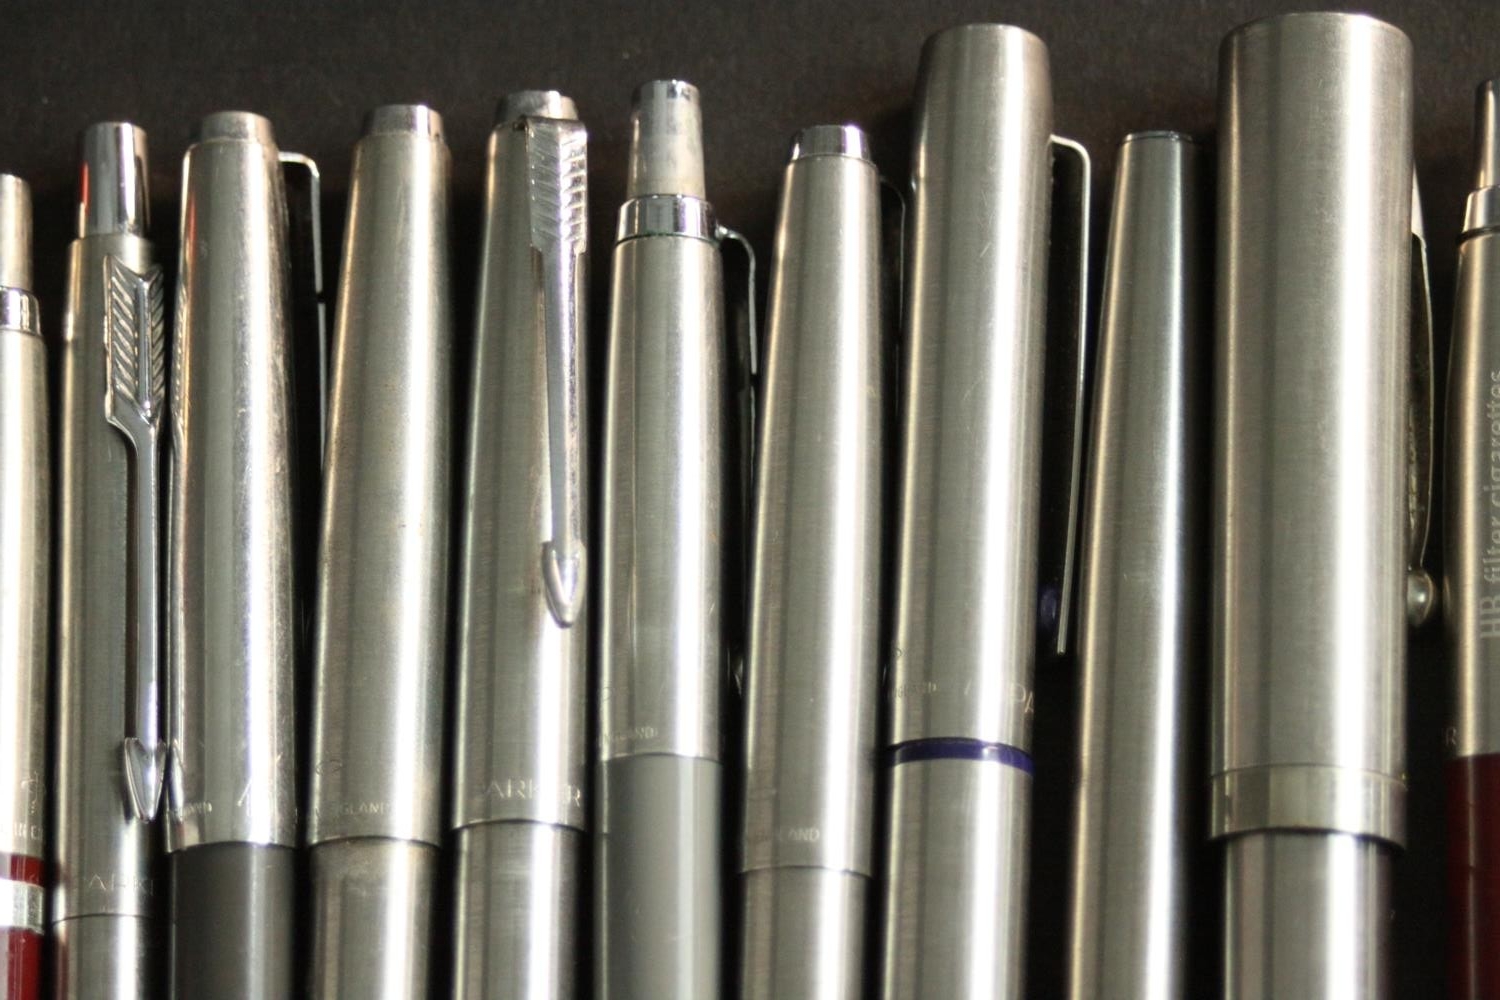 A collection of seventeen vintage fountain and ballpoint pens, makers including Parker and Sheaffer. - Image 3 of 6